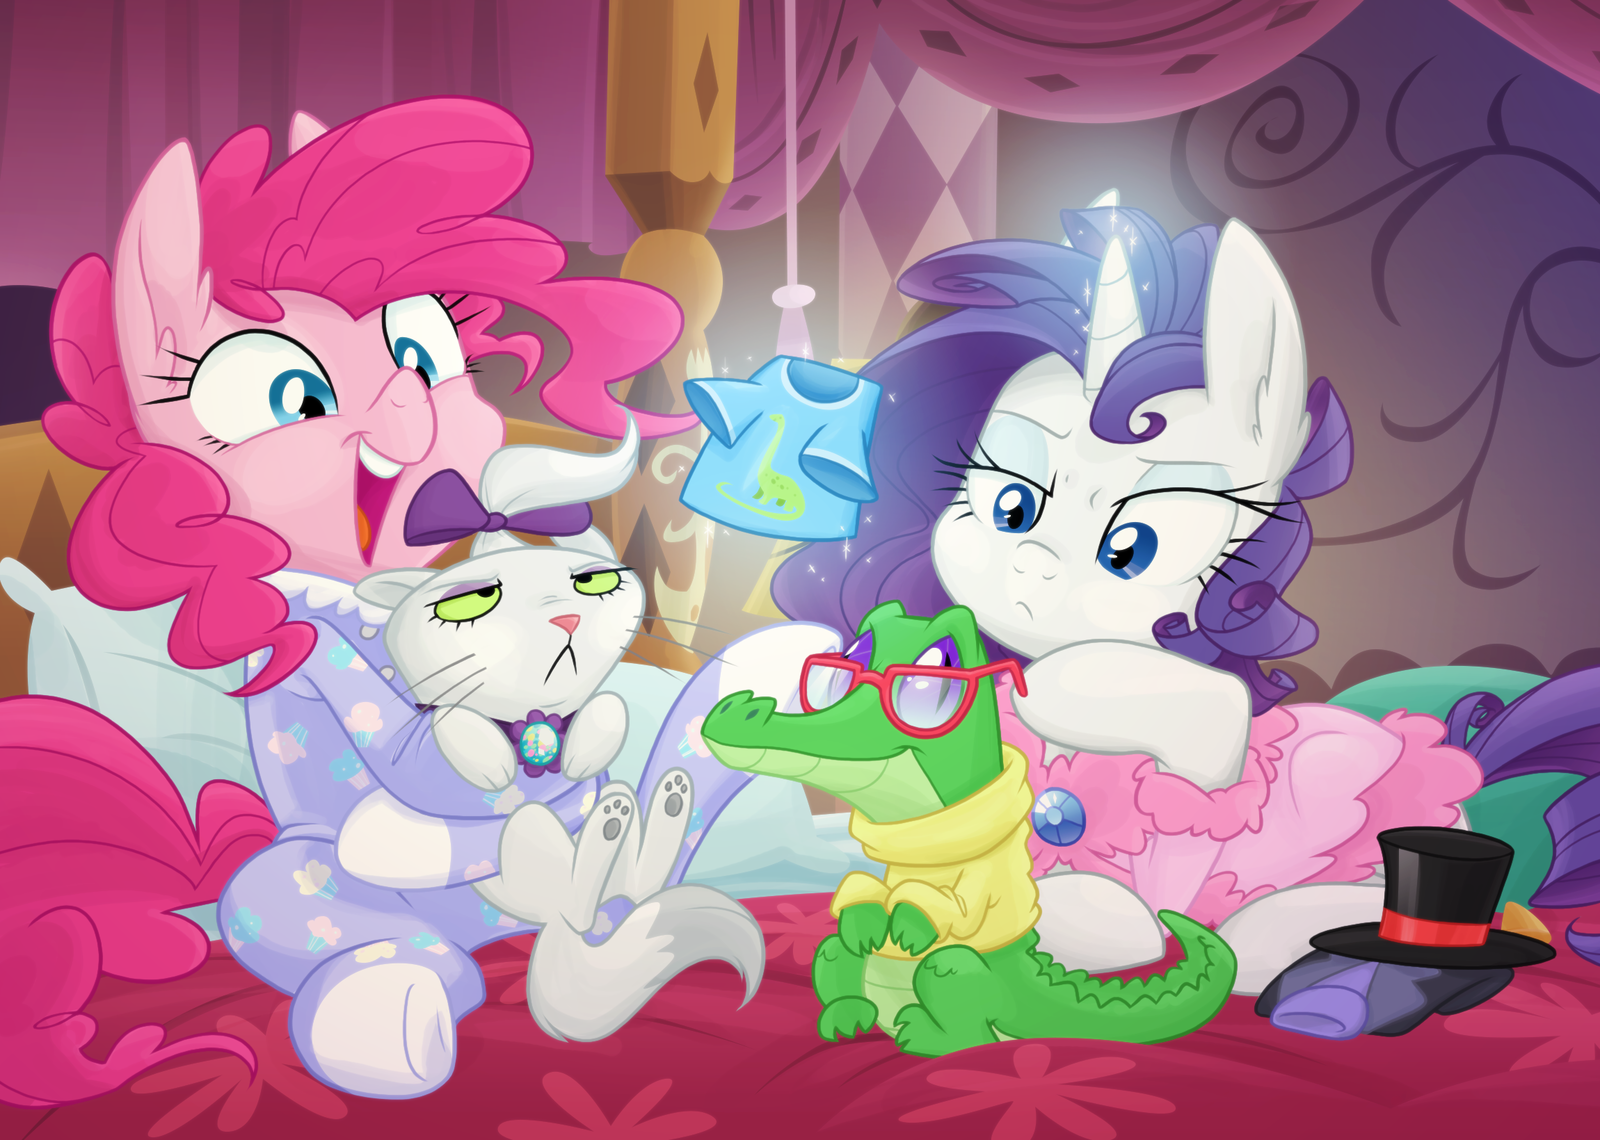 Pet Night - My little pony, Rarity, Pinkie pie, Opalescence, gummy, Equestria-Prevails